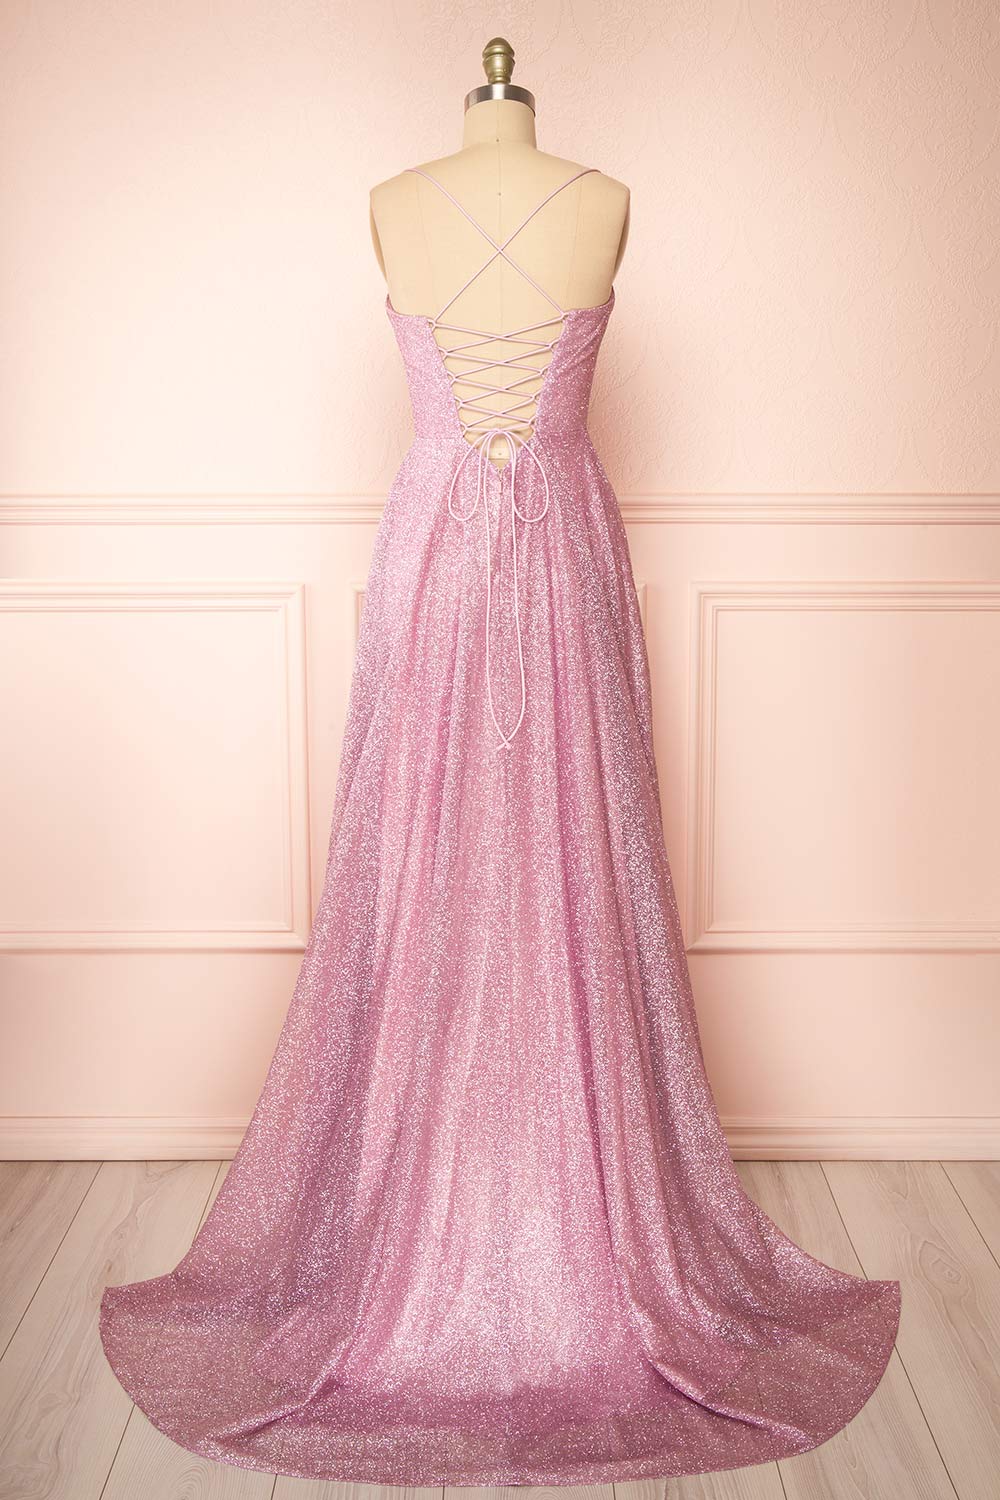 Lexy Pink Sparkly Cowl Neck Maxi Dress | Boutique 1861 back view